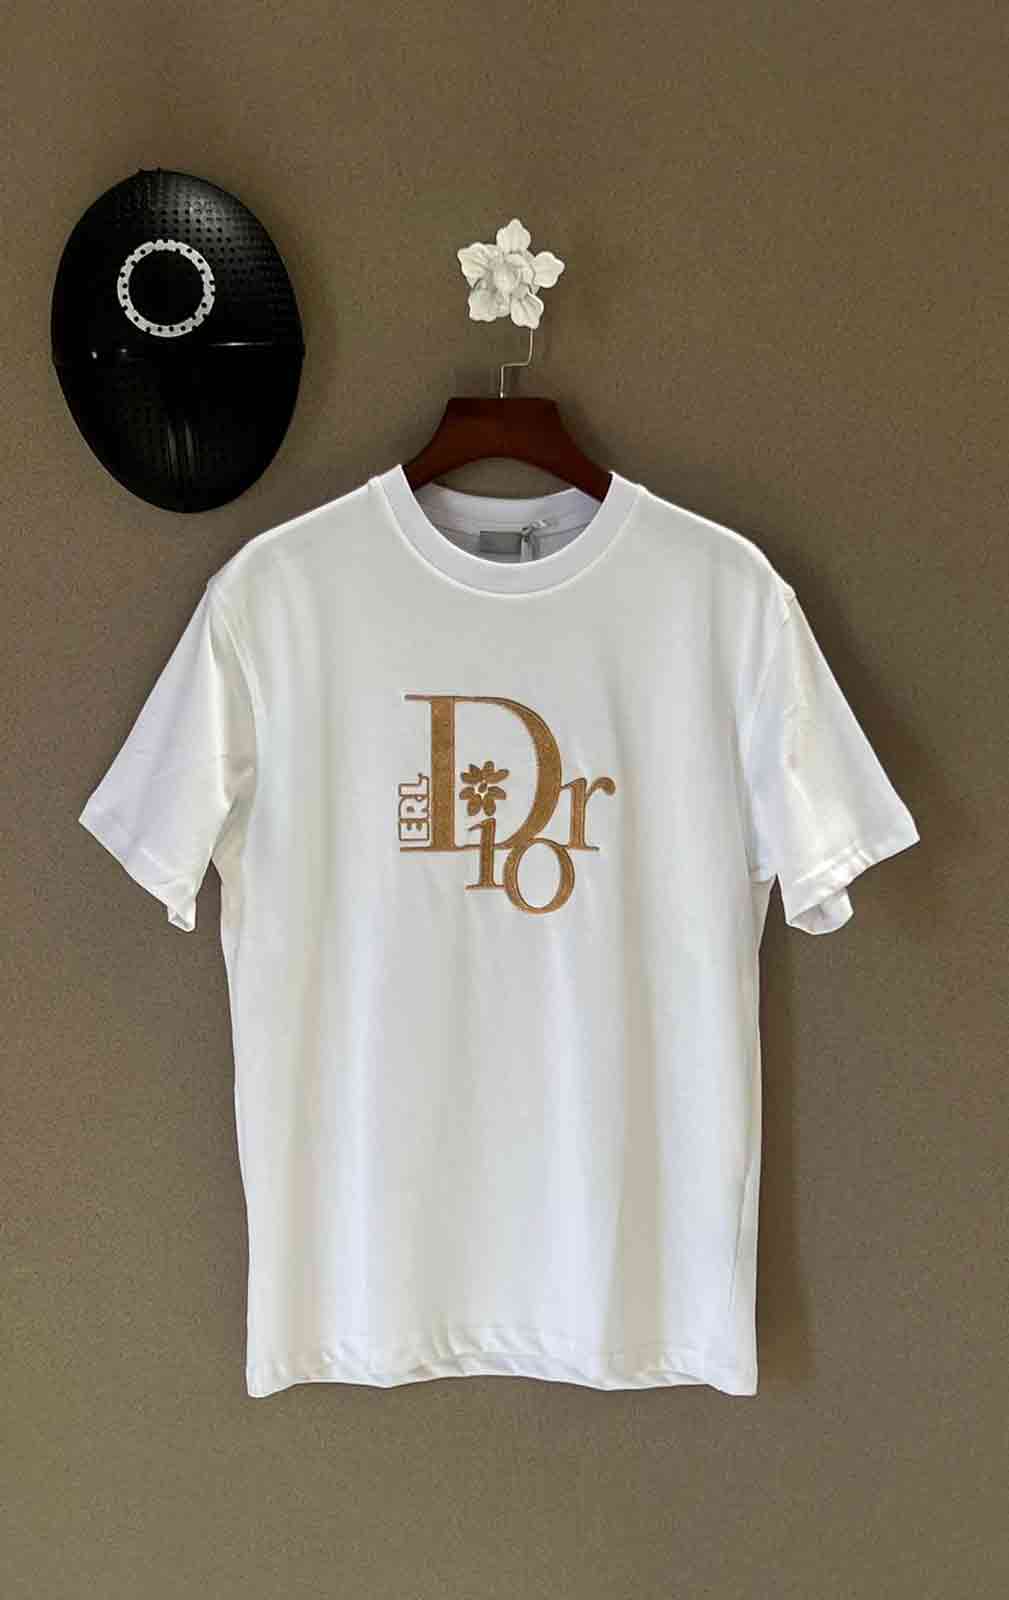 Short Sleeves Luxury T-Shirts-D-T-0